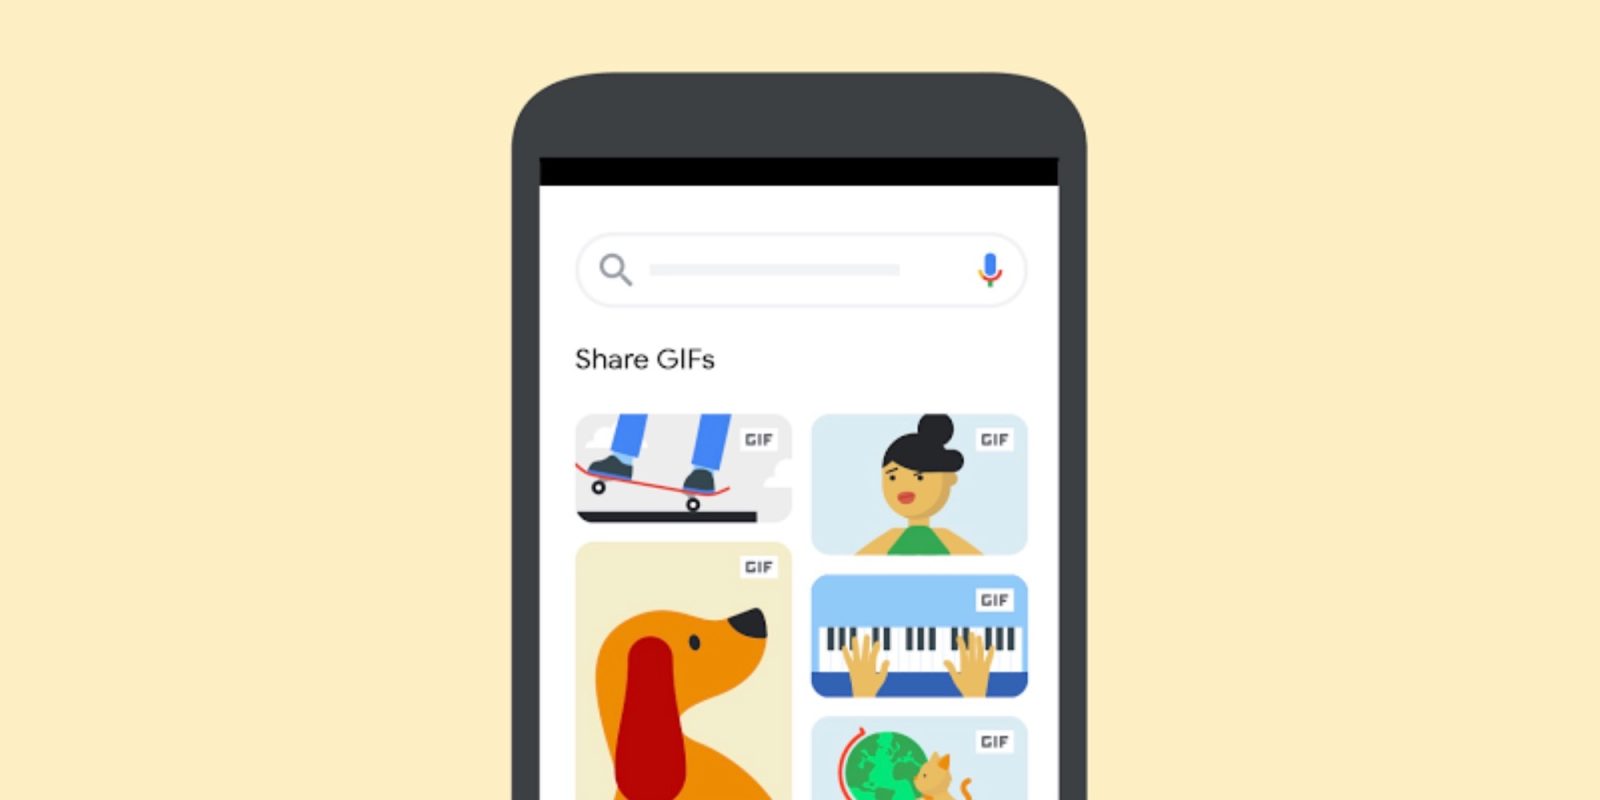 Google Images shareable GIFs